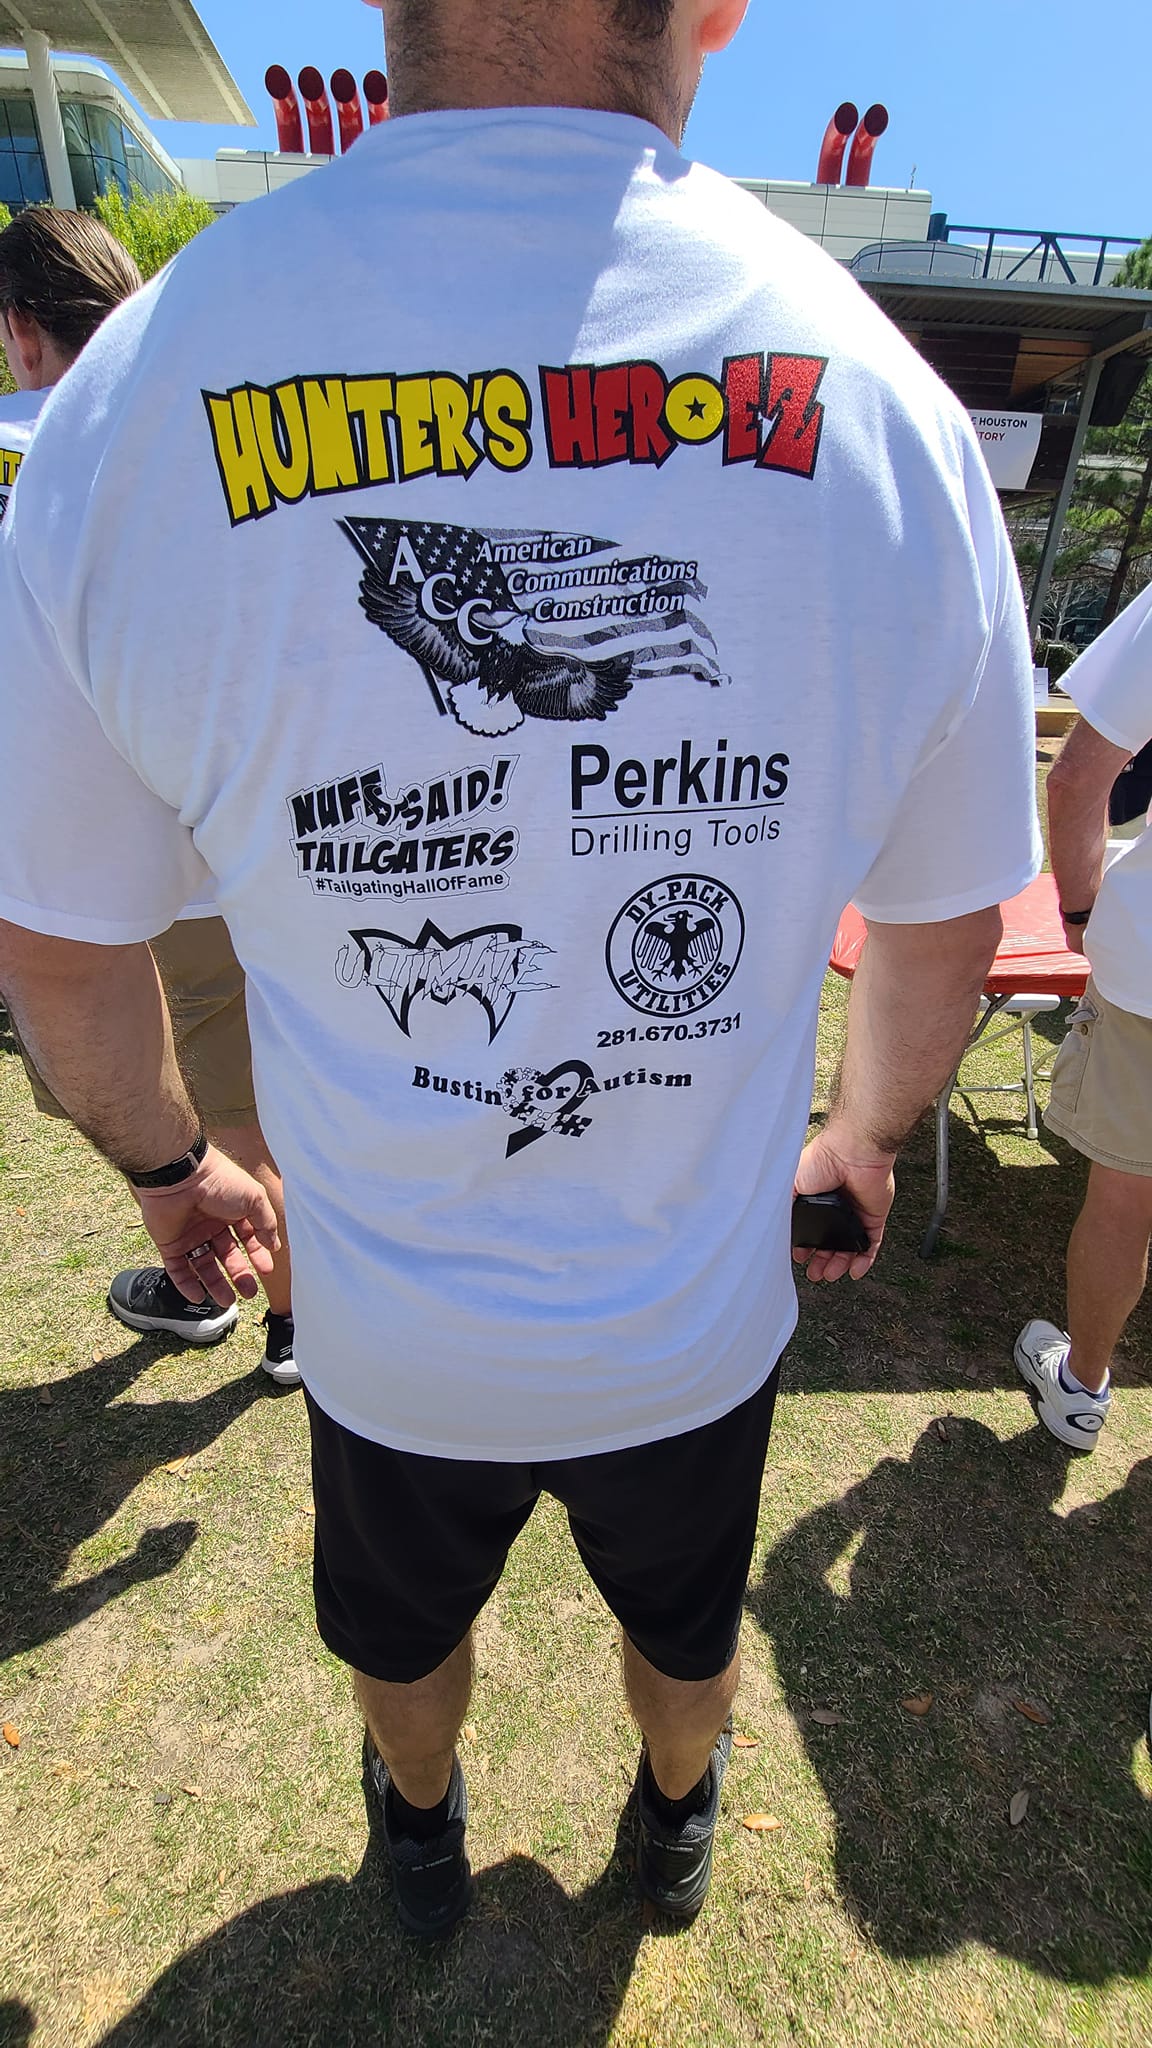 Bustin4Austism is a Proud Sponsor of Hunter's Heroes - Benefiting The Marfan Foundation Walk For Victory - March 26, 2022